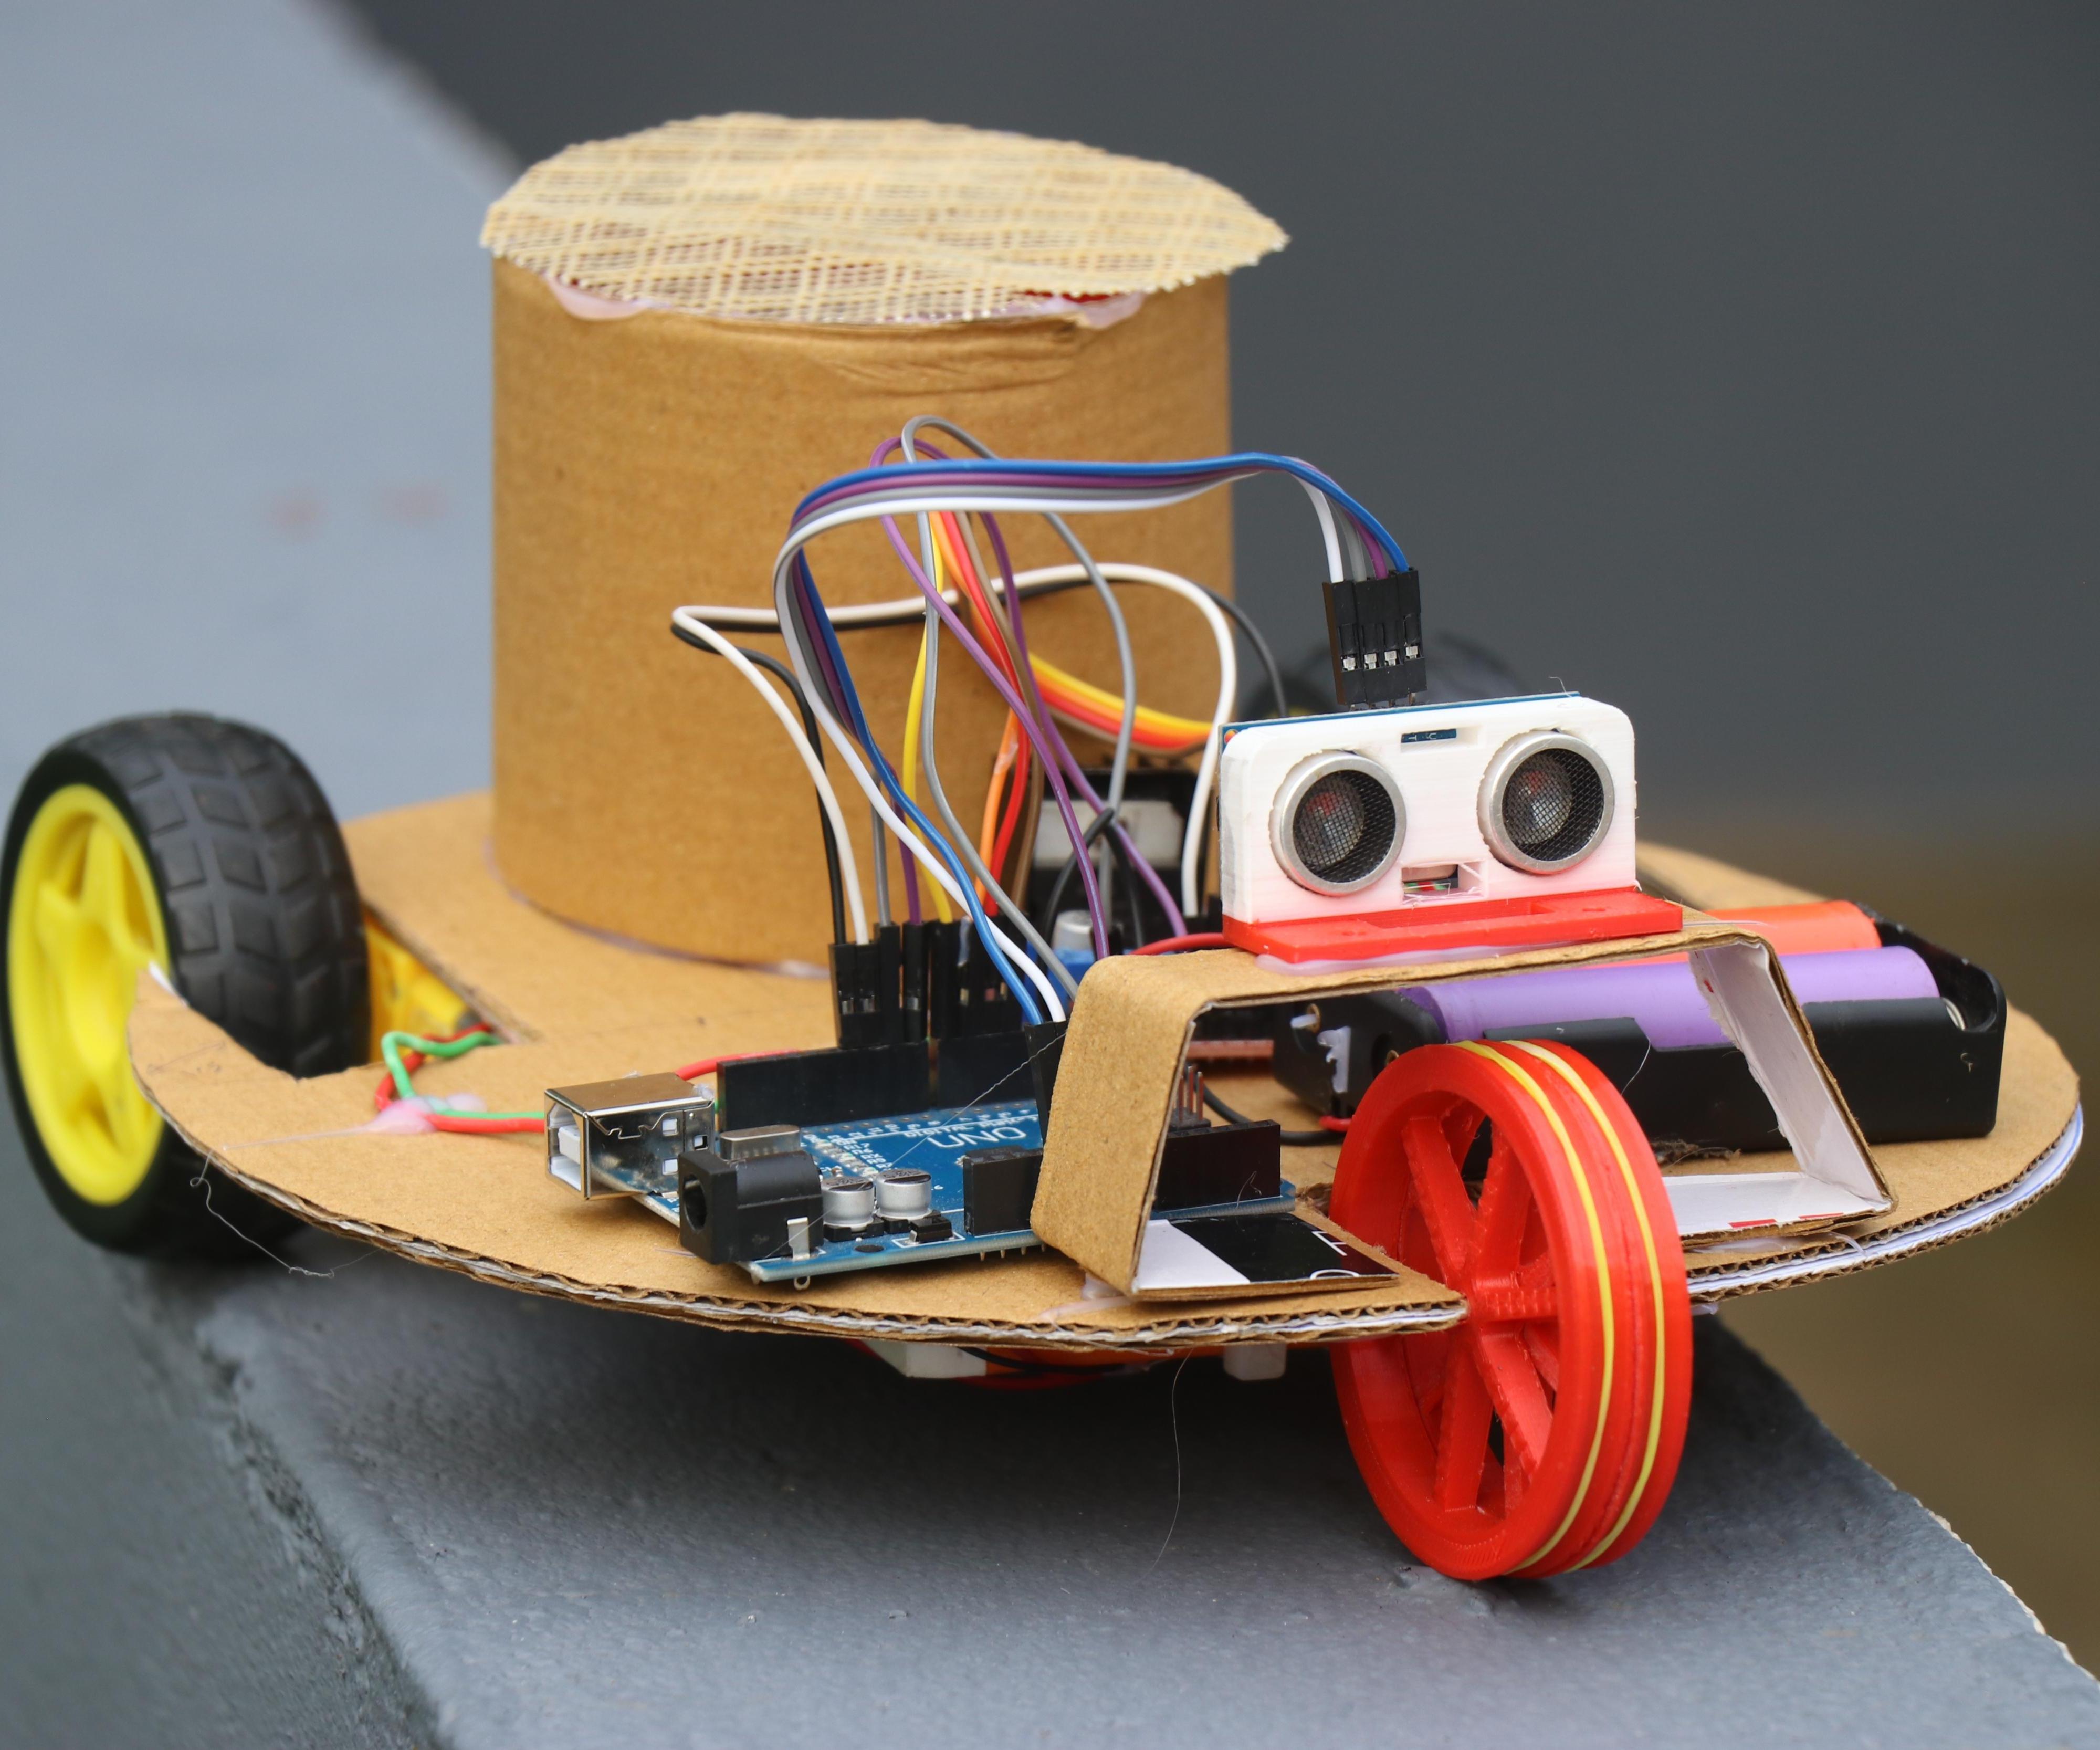 How to Make Floor Cleaning Robot Powered by Arduino